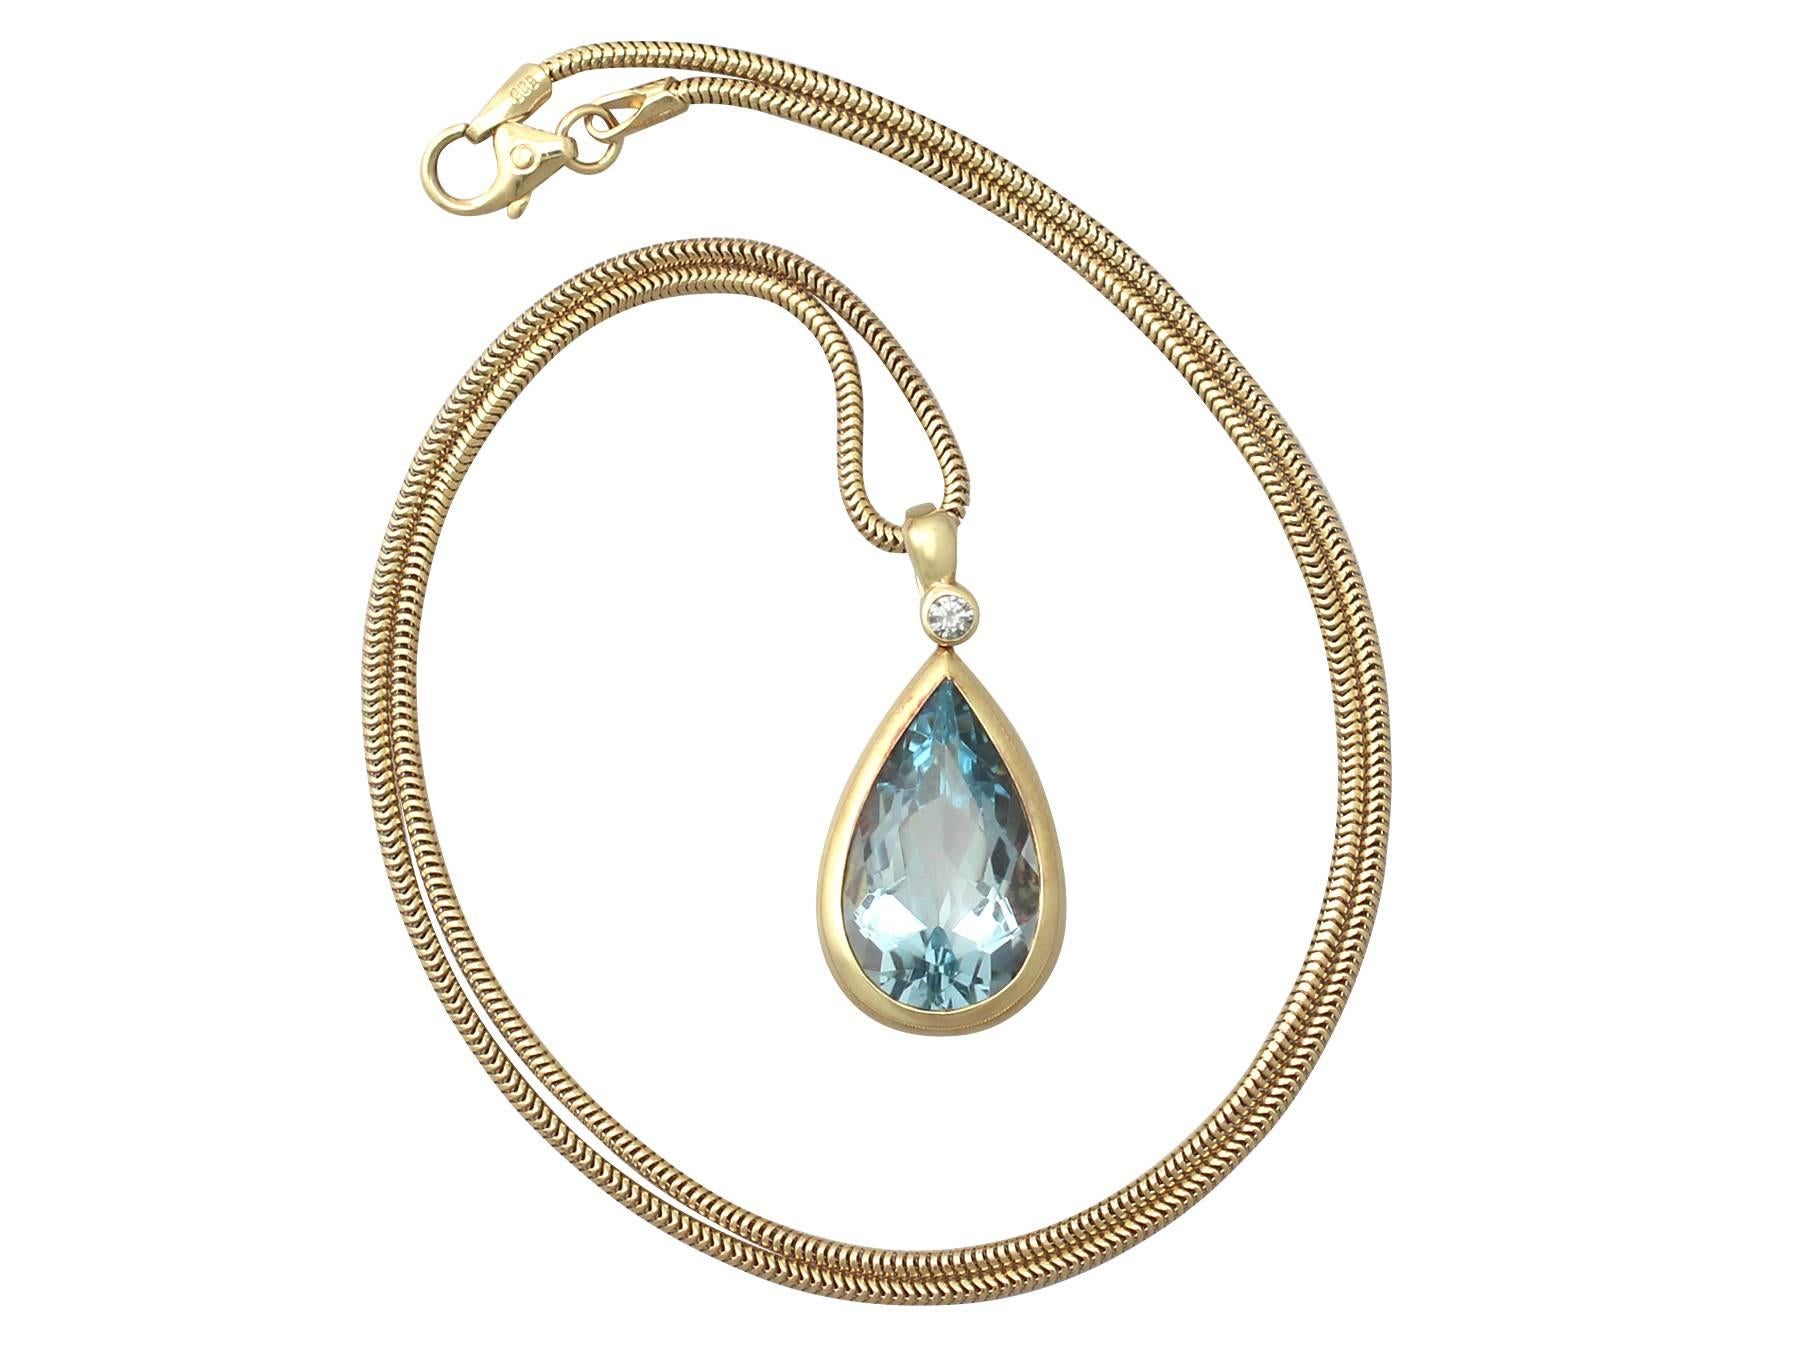 A fine and impressive 6.04 carat aquamarine and 0.04 carat diamond, 14 karat yellow gold pendant; part of our diverse jewelry and estate jewelry collections

This fine and impressive aquamarine and diamond pendant has been crafted in 14k yellow